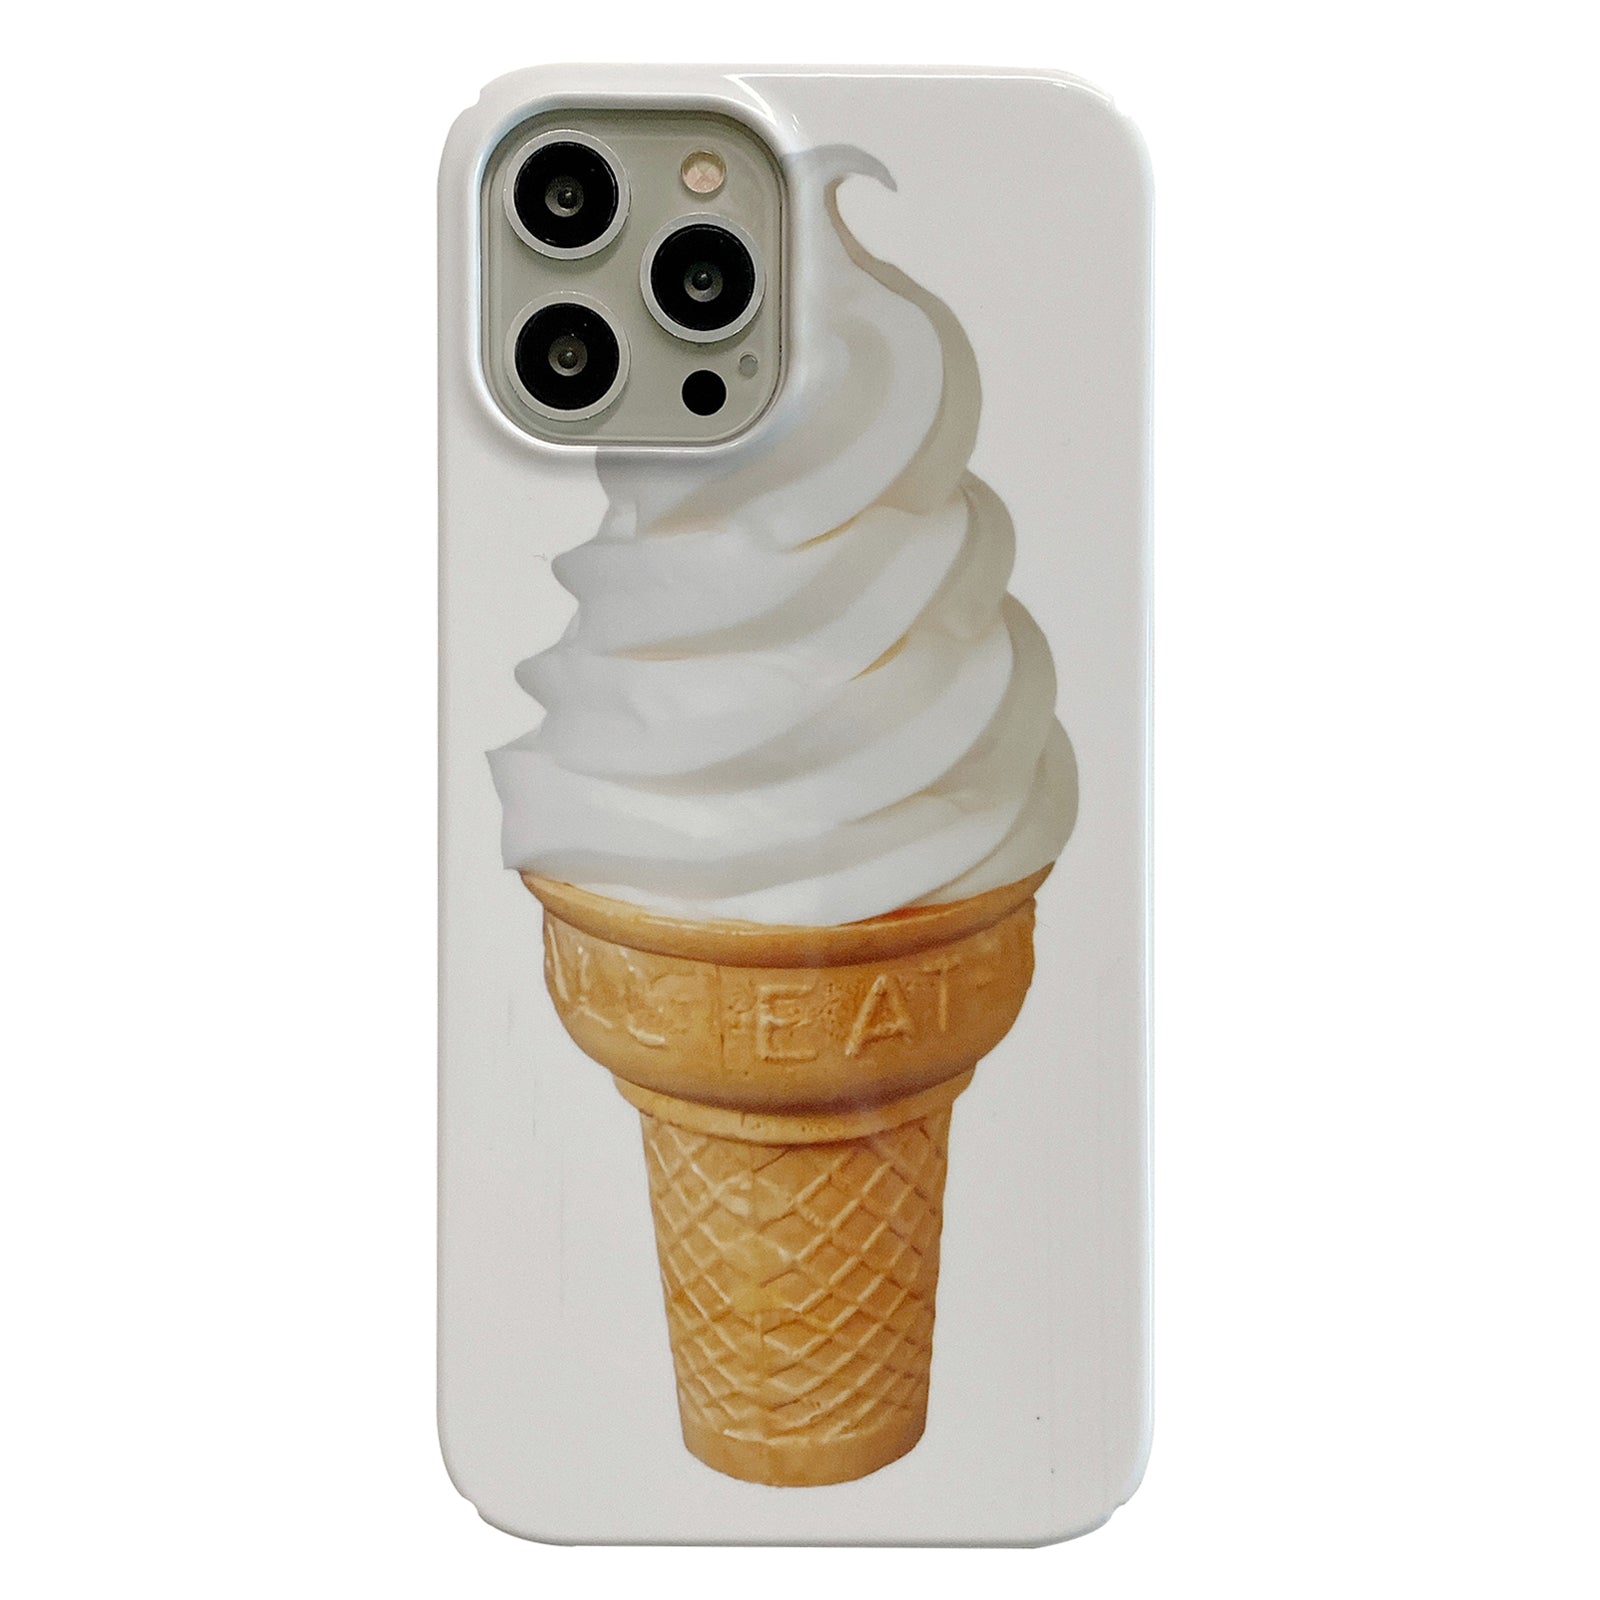 Uniqkart for iPhone 12 Pro Max 6.7 inch Hard PC Phone Case Pattern Printing Protective Glossy Phone Shell - Ice Cream